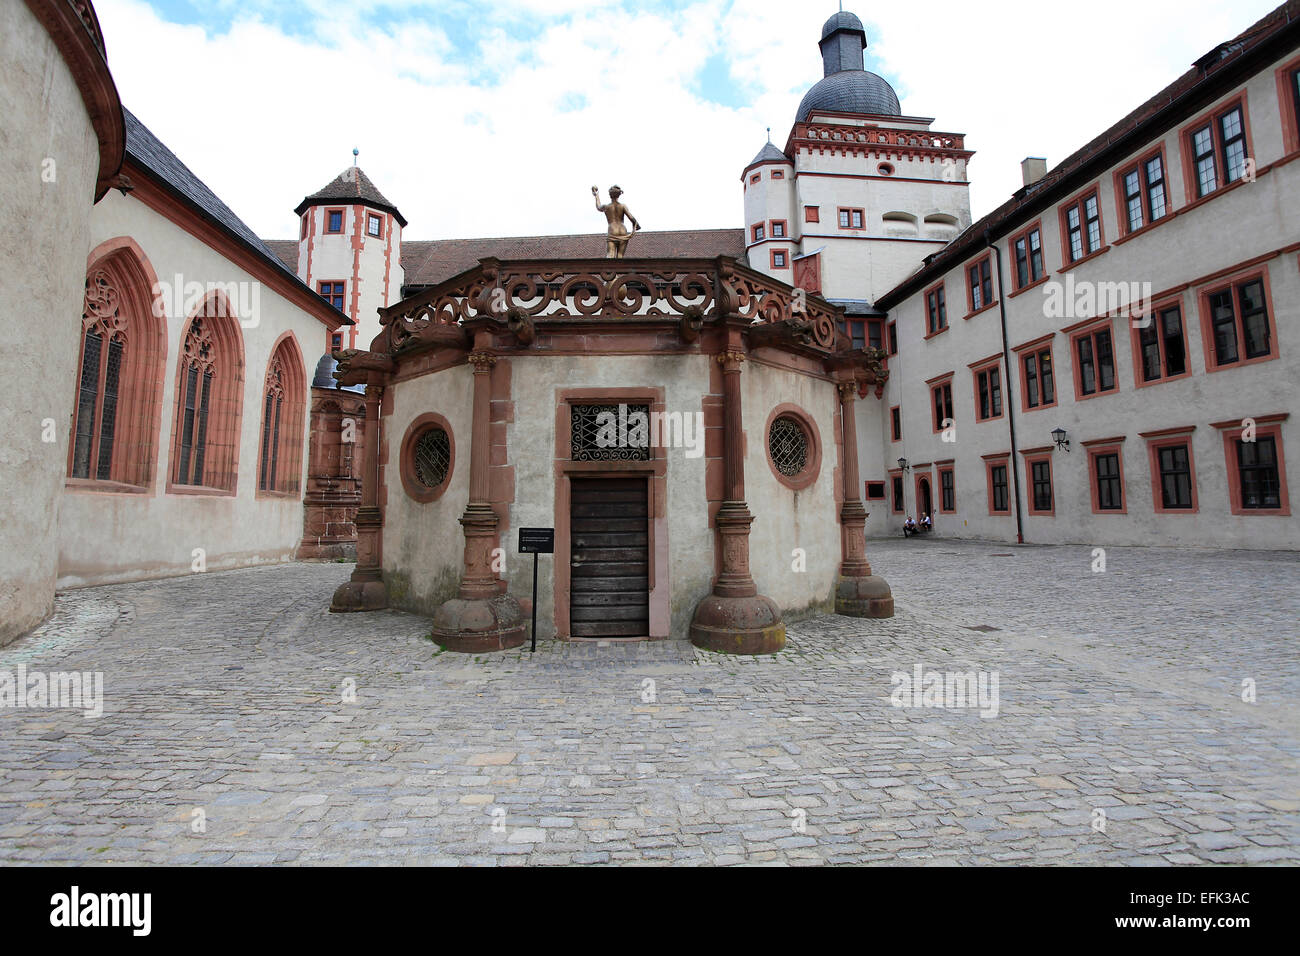 The well temple of Marienberg Fortress in Wuerzburg. The depth of the well is 102 meters. It is fed by two springs of water in a deep of 101 meters. Photo: Klaus Nowottnick Date: August 11, 2012 Stock Photo